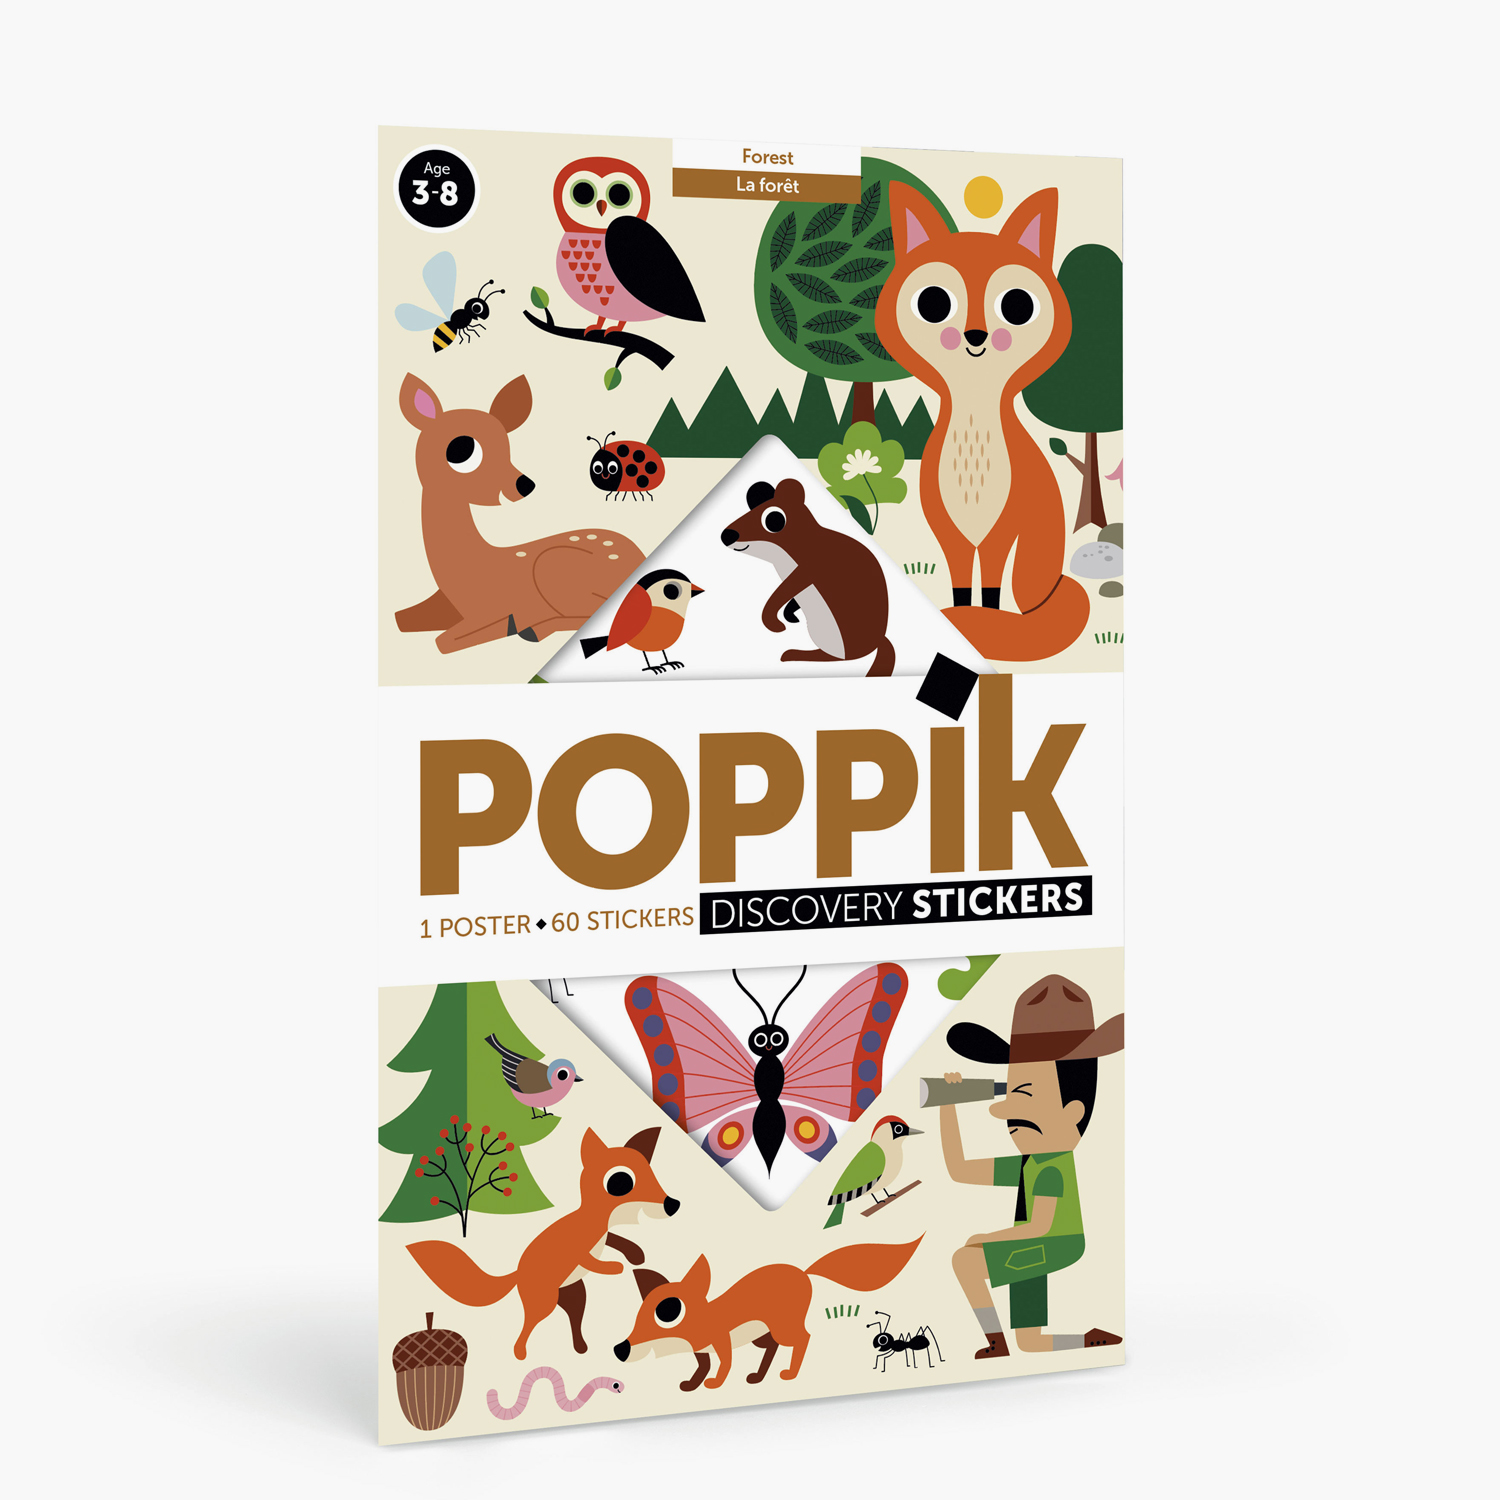 poppik-in-the-forest-educational-sticker-poster-60-stickers